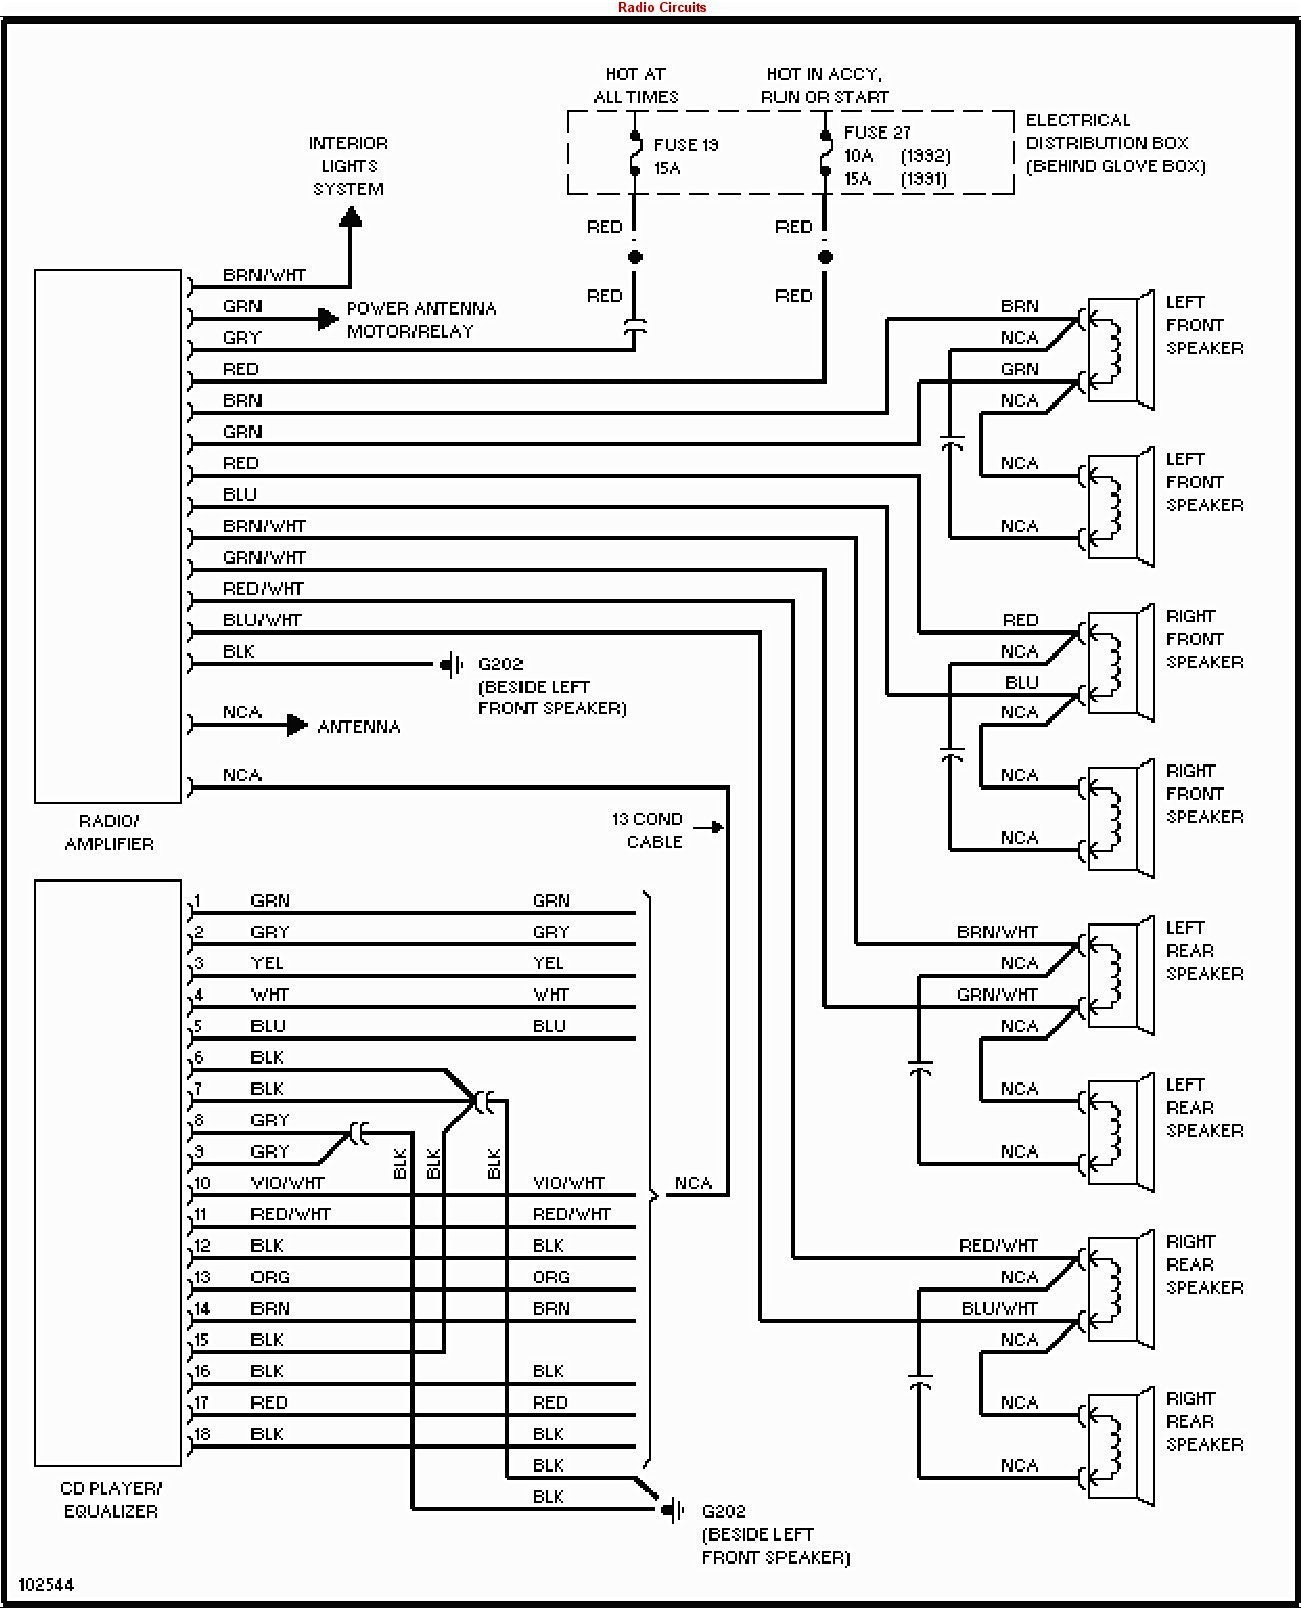 Wiring Diagram for Clarion Car Stereo Lovely Car Stereo Wiring Diagram Diagram Of Wiring Diagram for Clarion Car Stereo